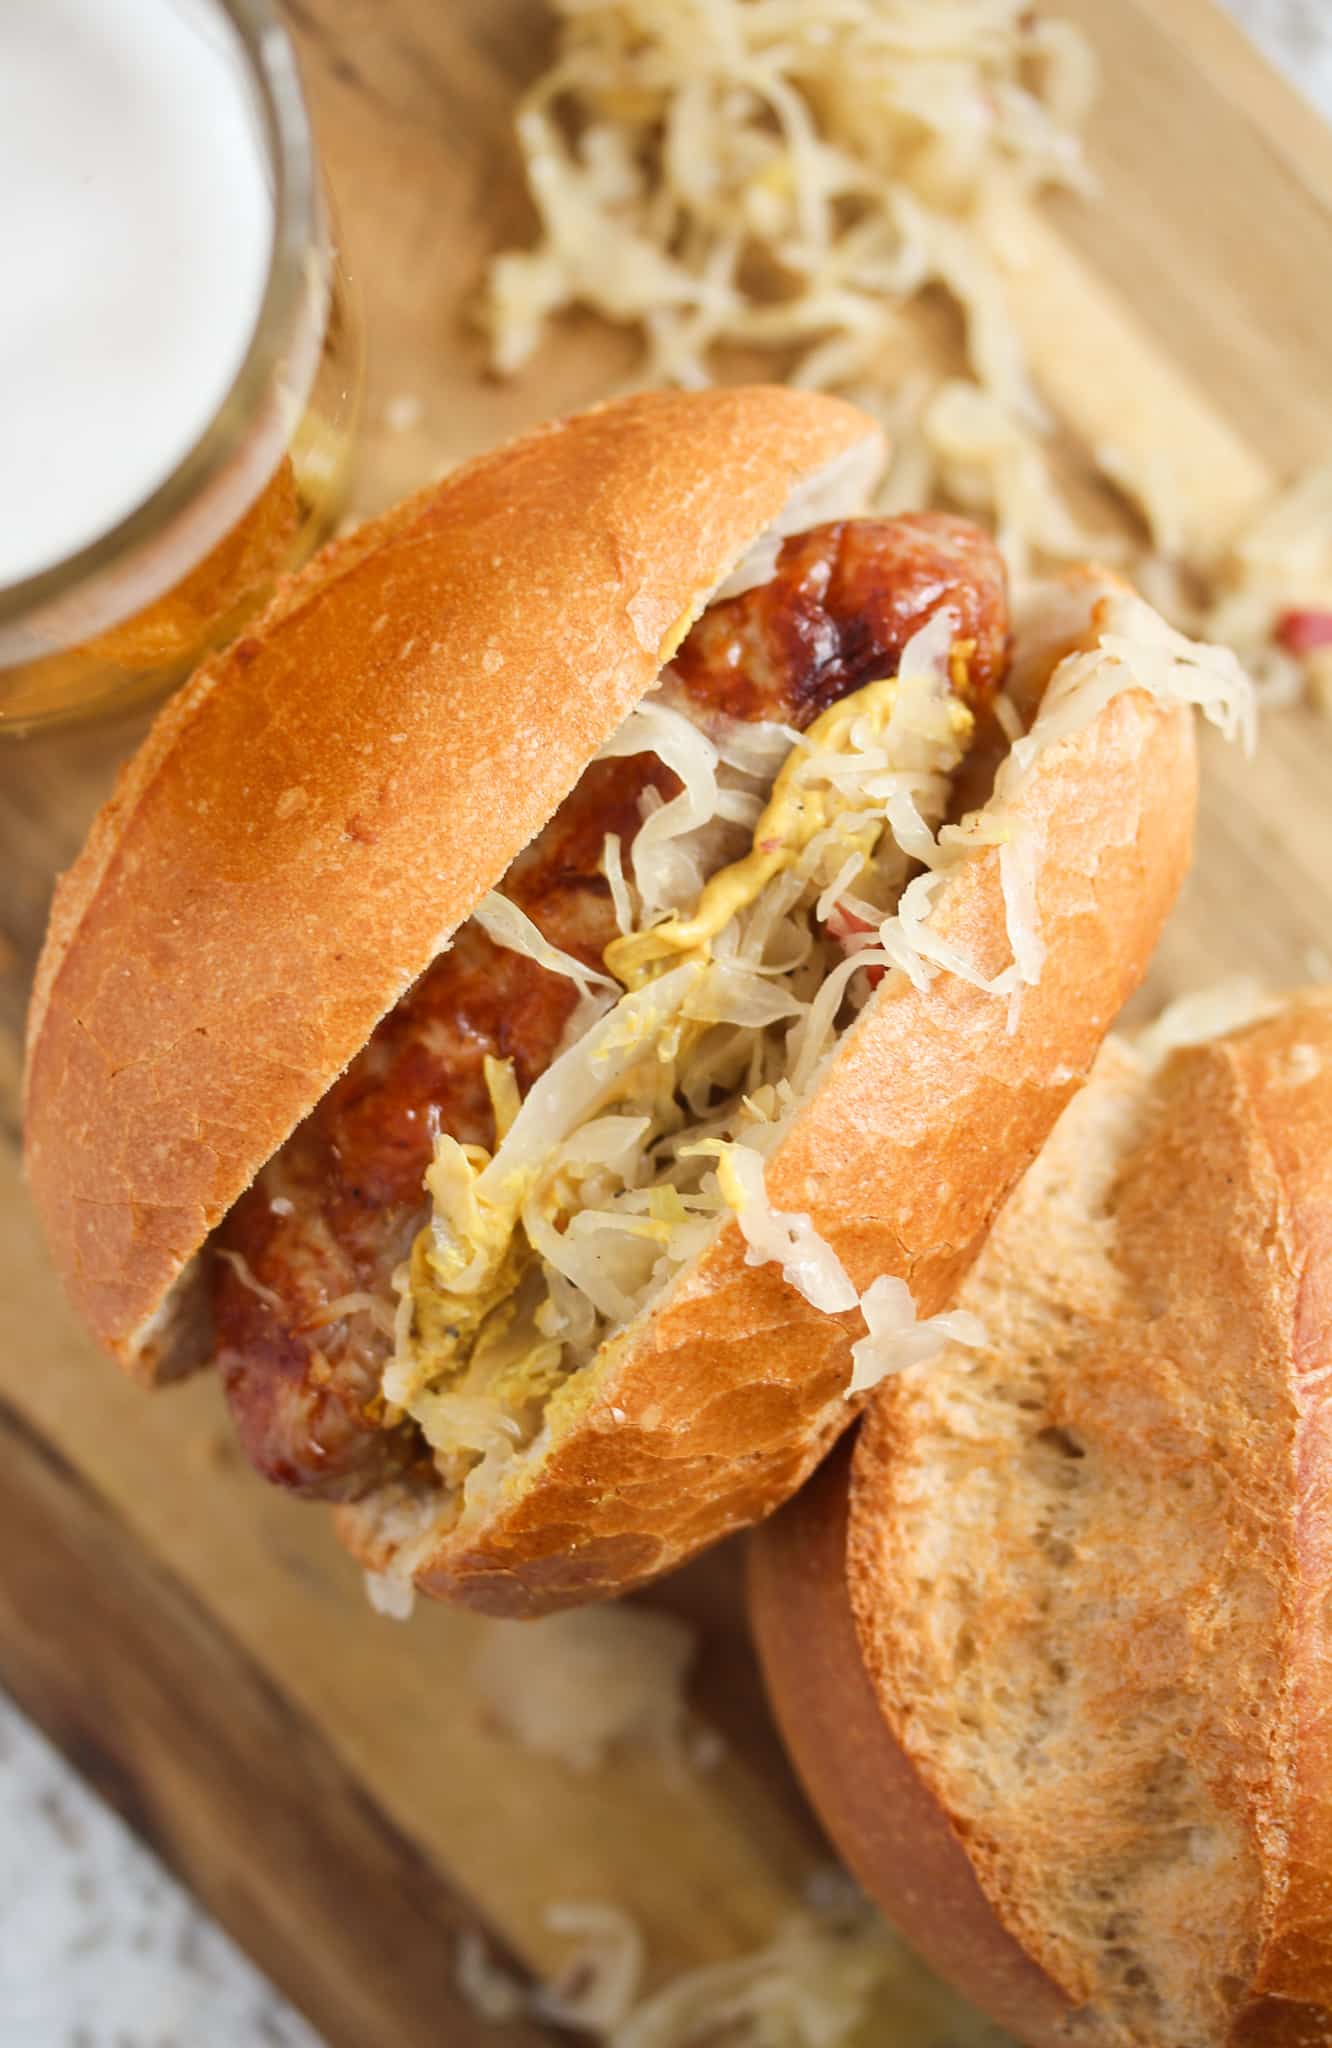 german bread roll stuffed with kraut and bratwurst on a wooden board with a glass of beer.